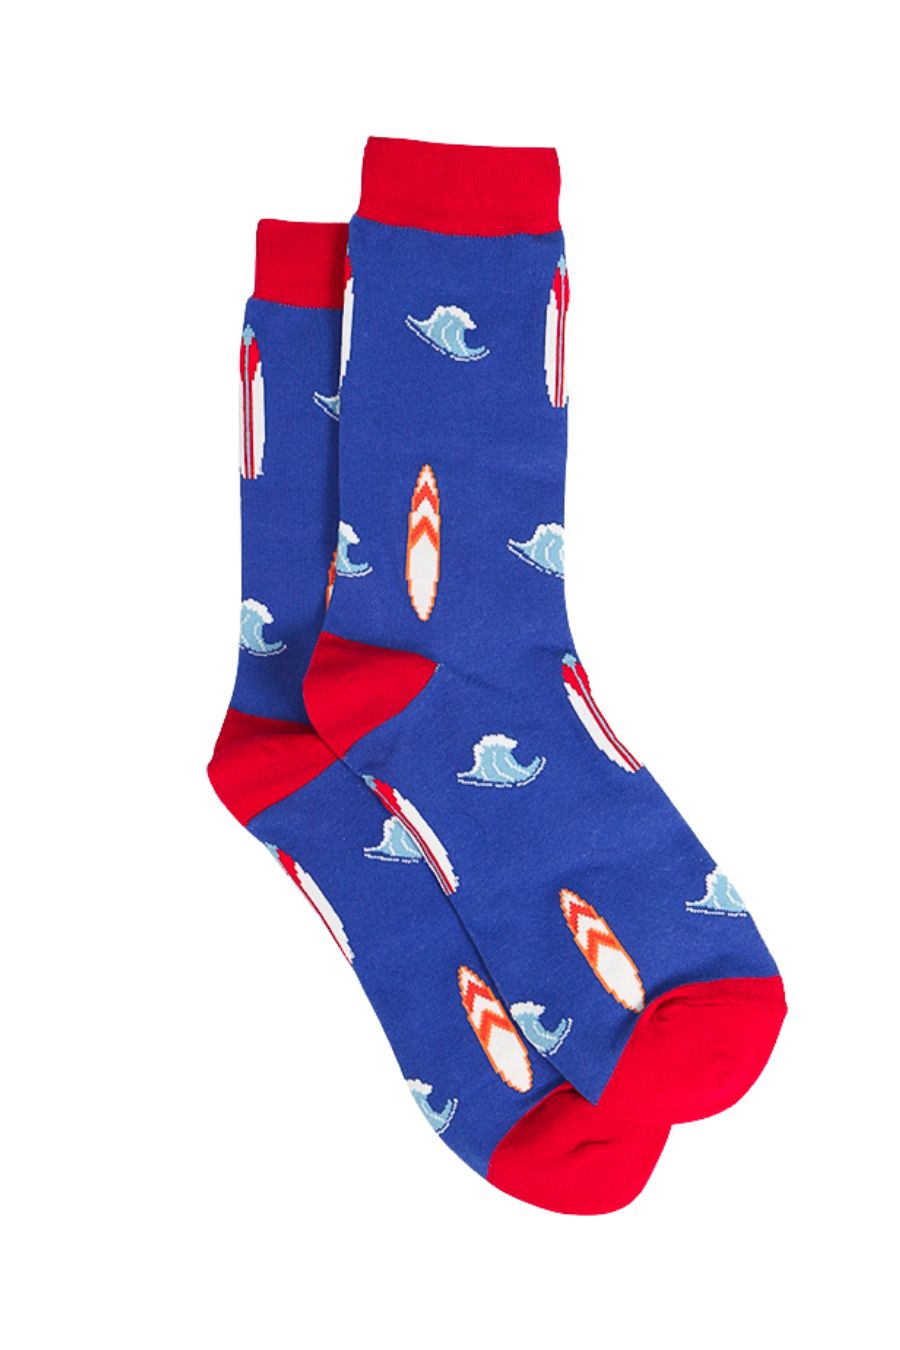 blue socks with a red heel, toe and cuff with an all over pattern of red surfboards and blue ocean waves